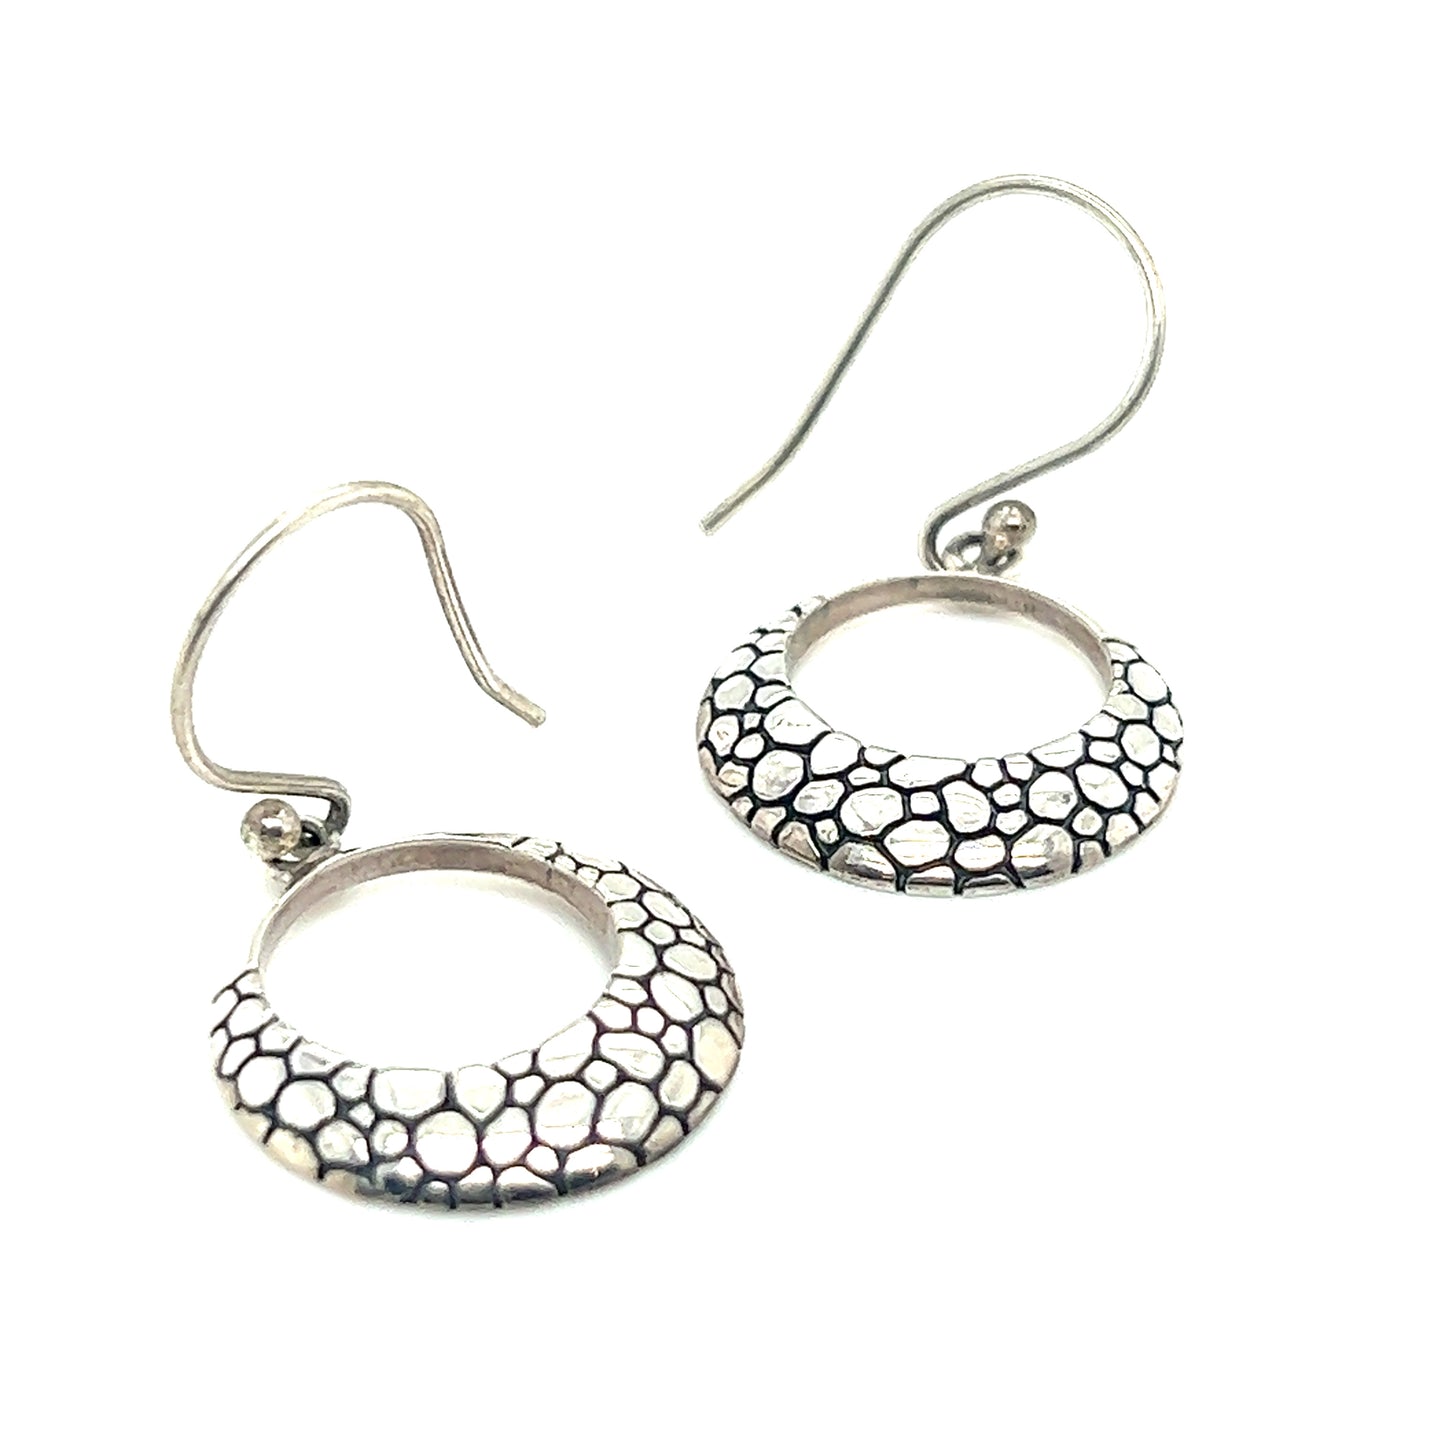 These Super Silver Cobblestone Circle Earrings combine modern charm with urban elegance, featuring a mesmerizing black and white pattern.